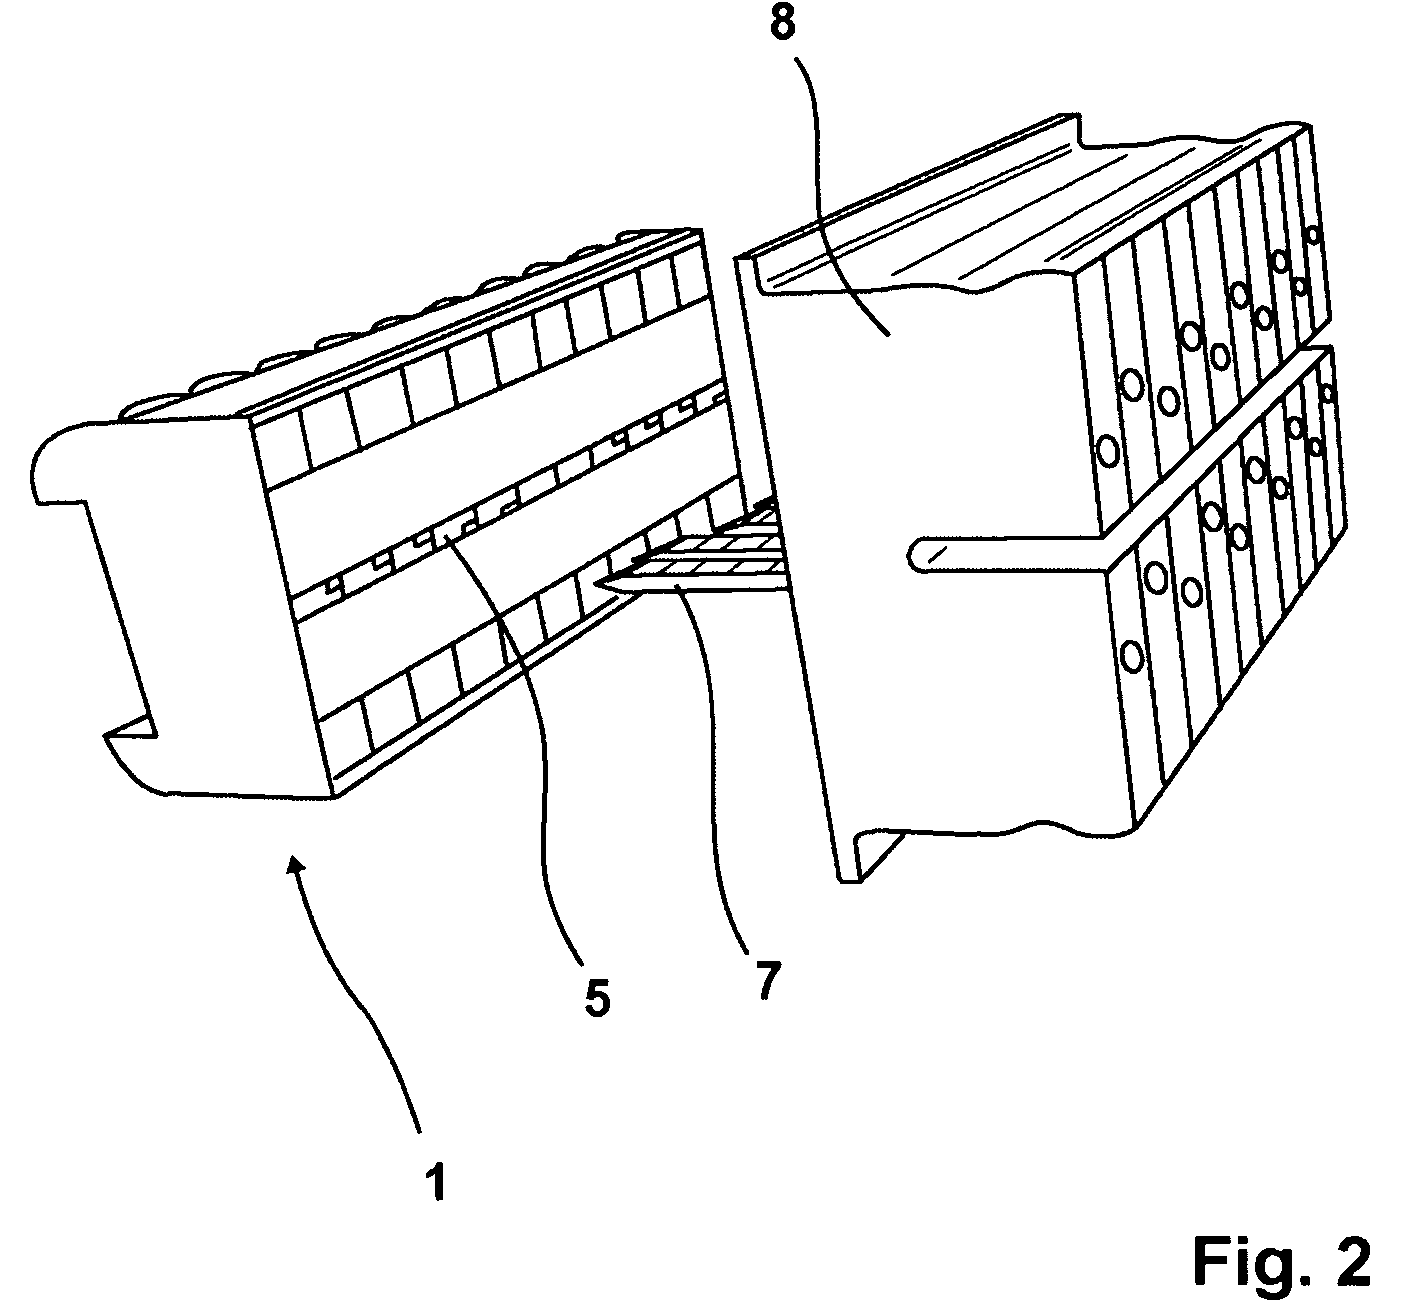 Apparatus for testing a protective measuring or metering device as a constituent part of a high or medium voltage installation, more specifically of a utility protective relay, of a generator protective device, of a current meter, or of other protective, measuring or metering electrical devices in a high or medium voltage installation